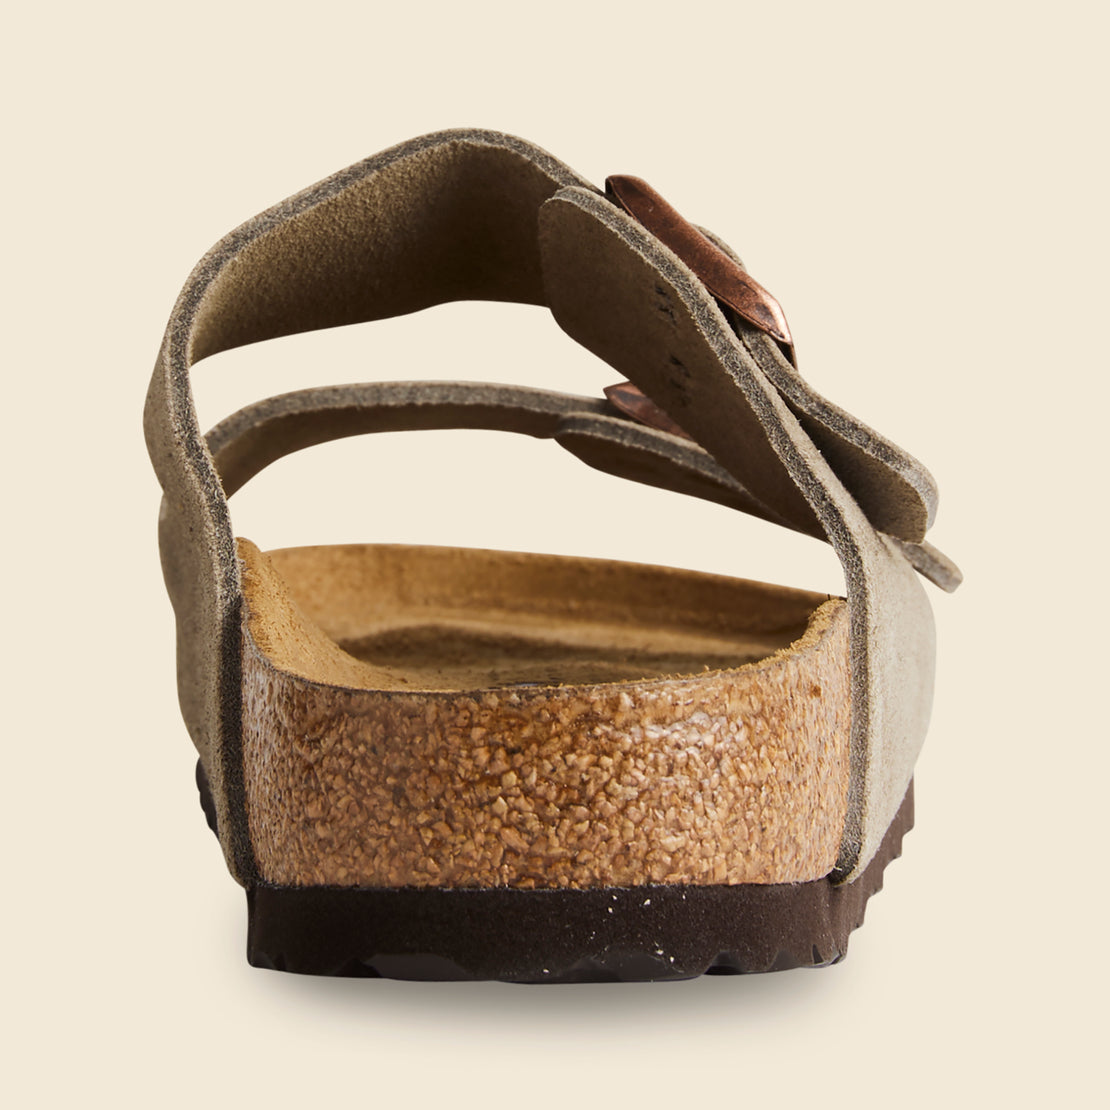 Arizona Soft Footbed Suede Leather Taupe